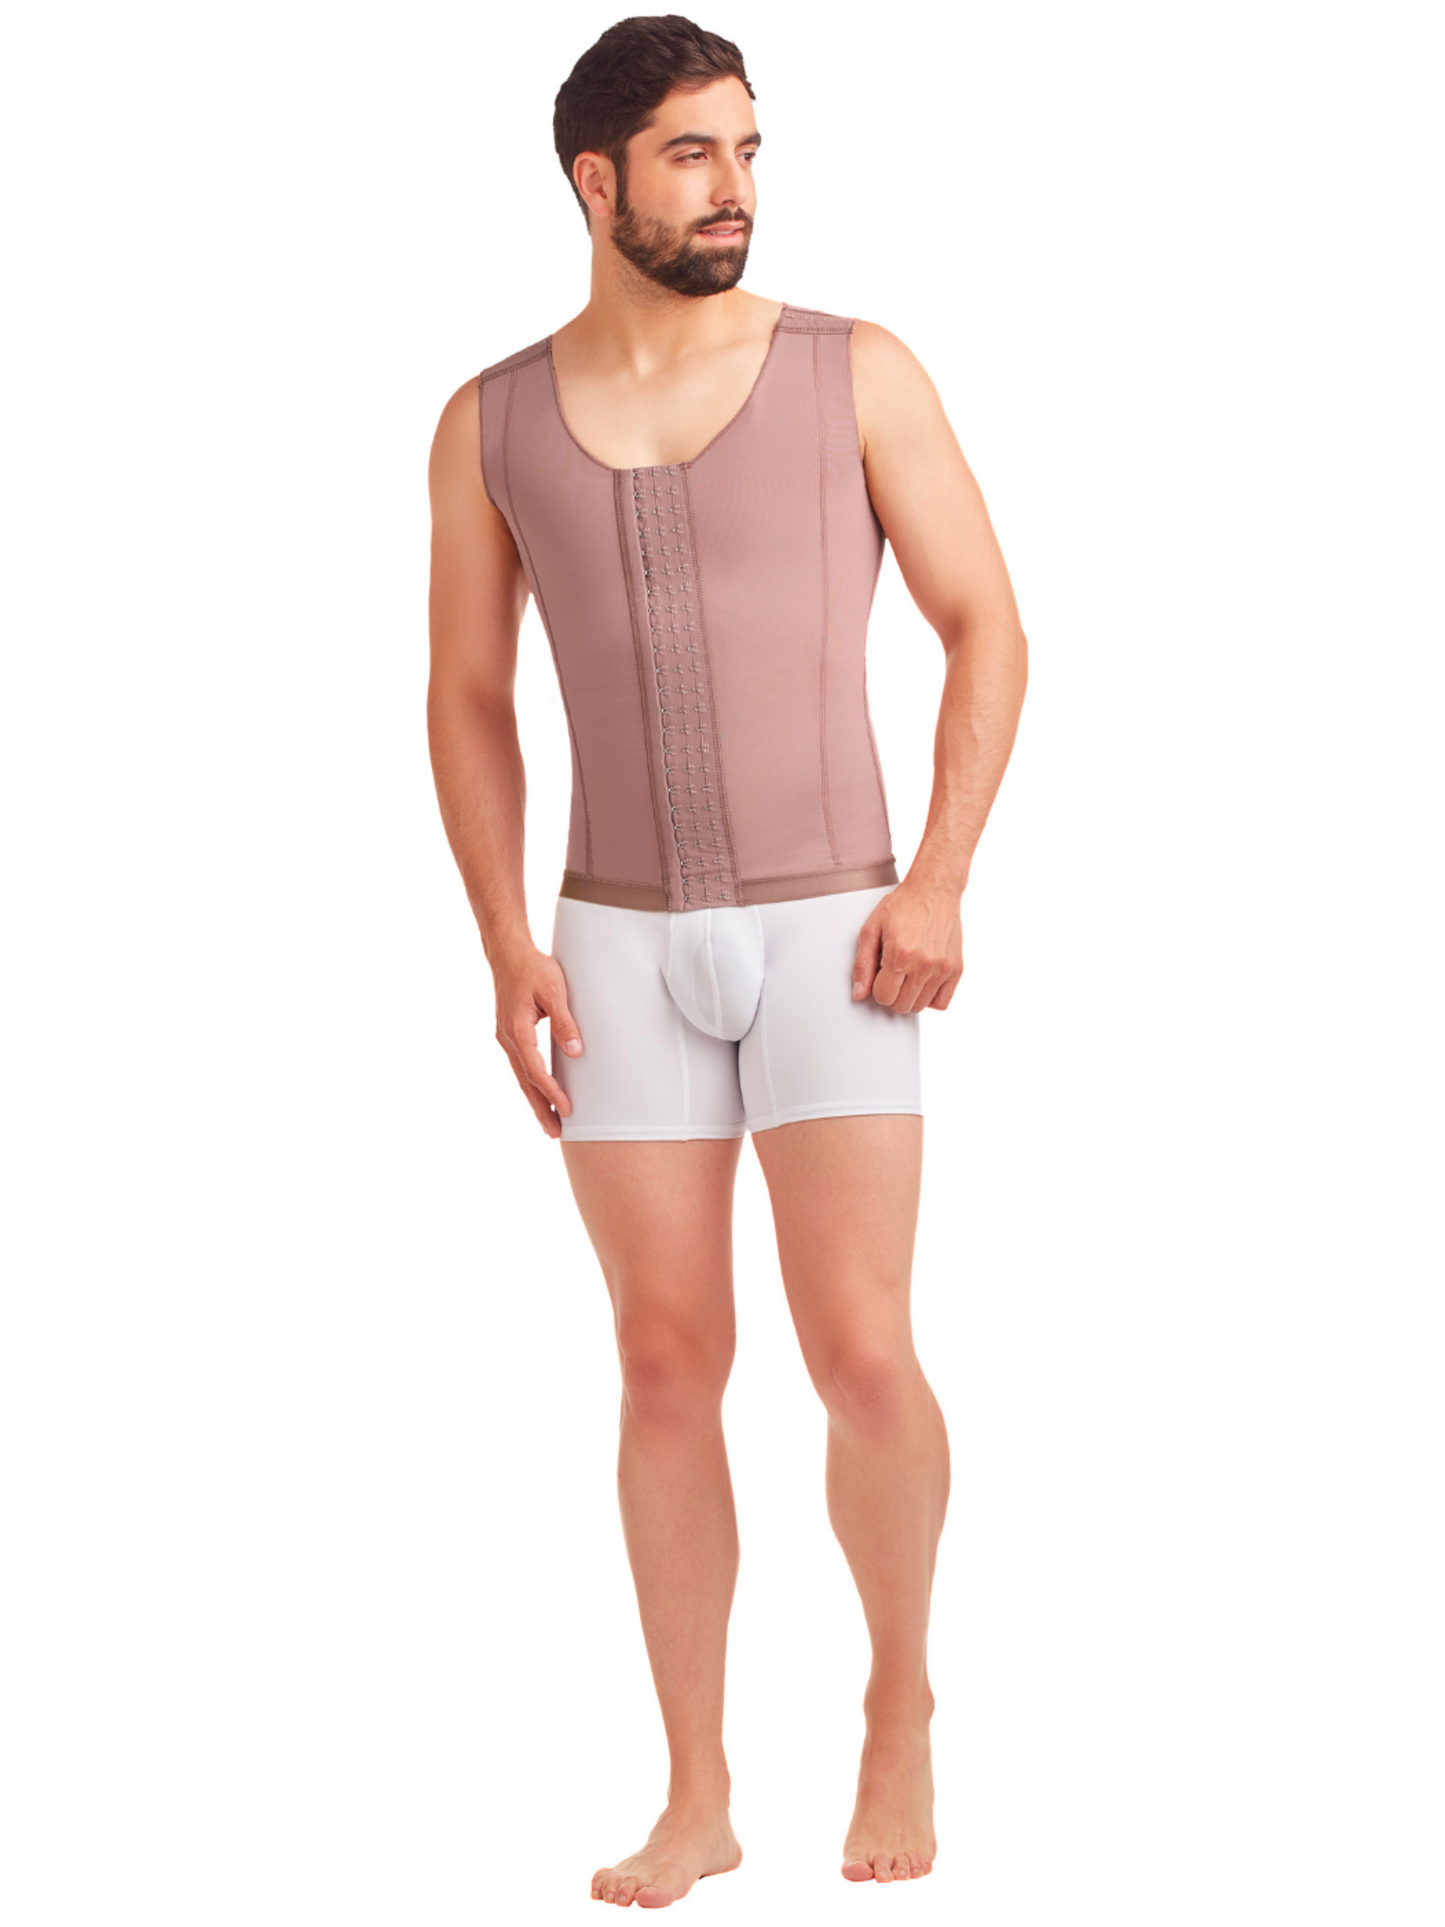 Post-Surgical & Abdomen Reduction Male Girdle : Delie by Fajate Ref 09016